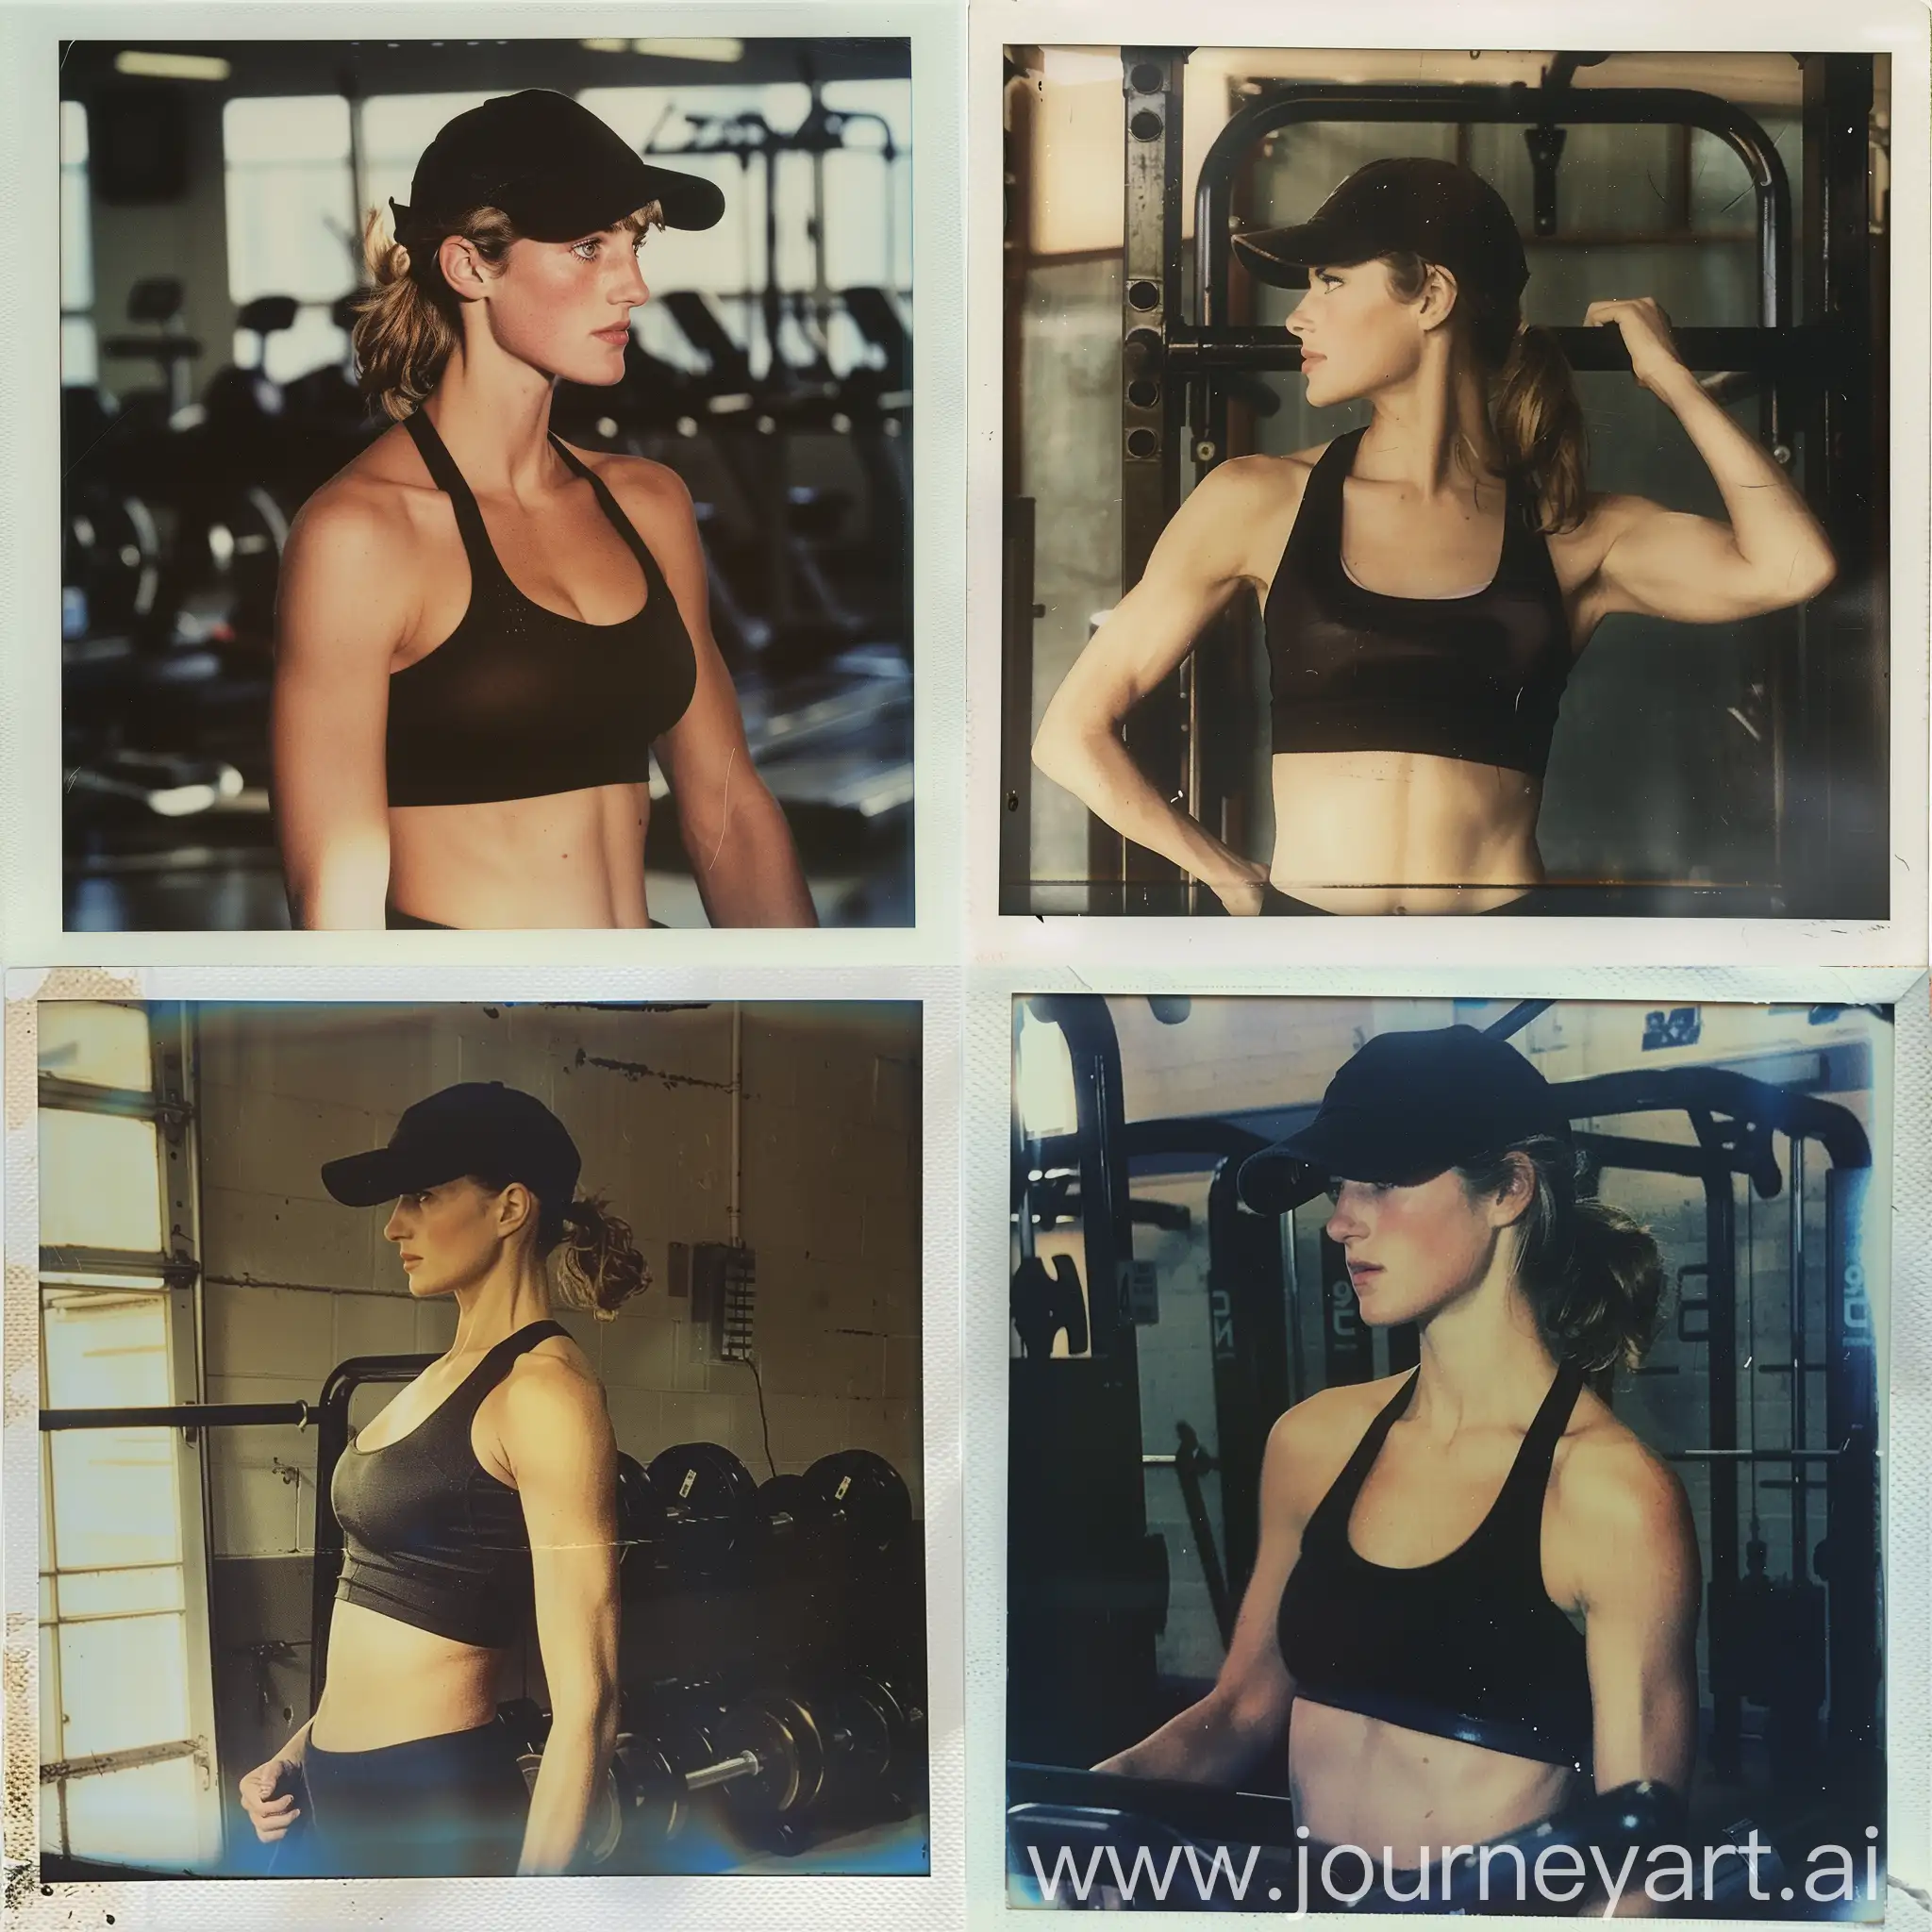 Princess-Diana-Working-Out-in-Black-Gym-Attire-1997-Vintage-Polaroid-Collage